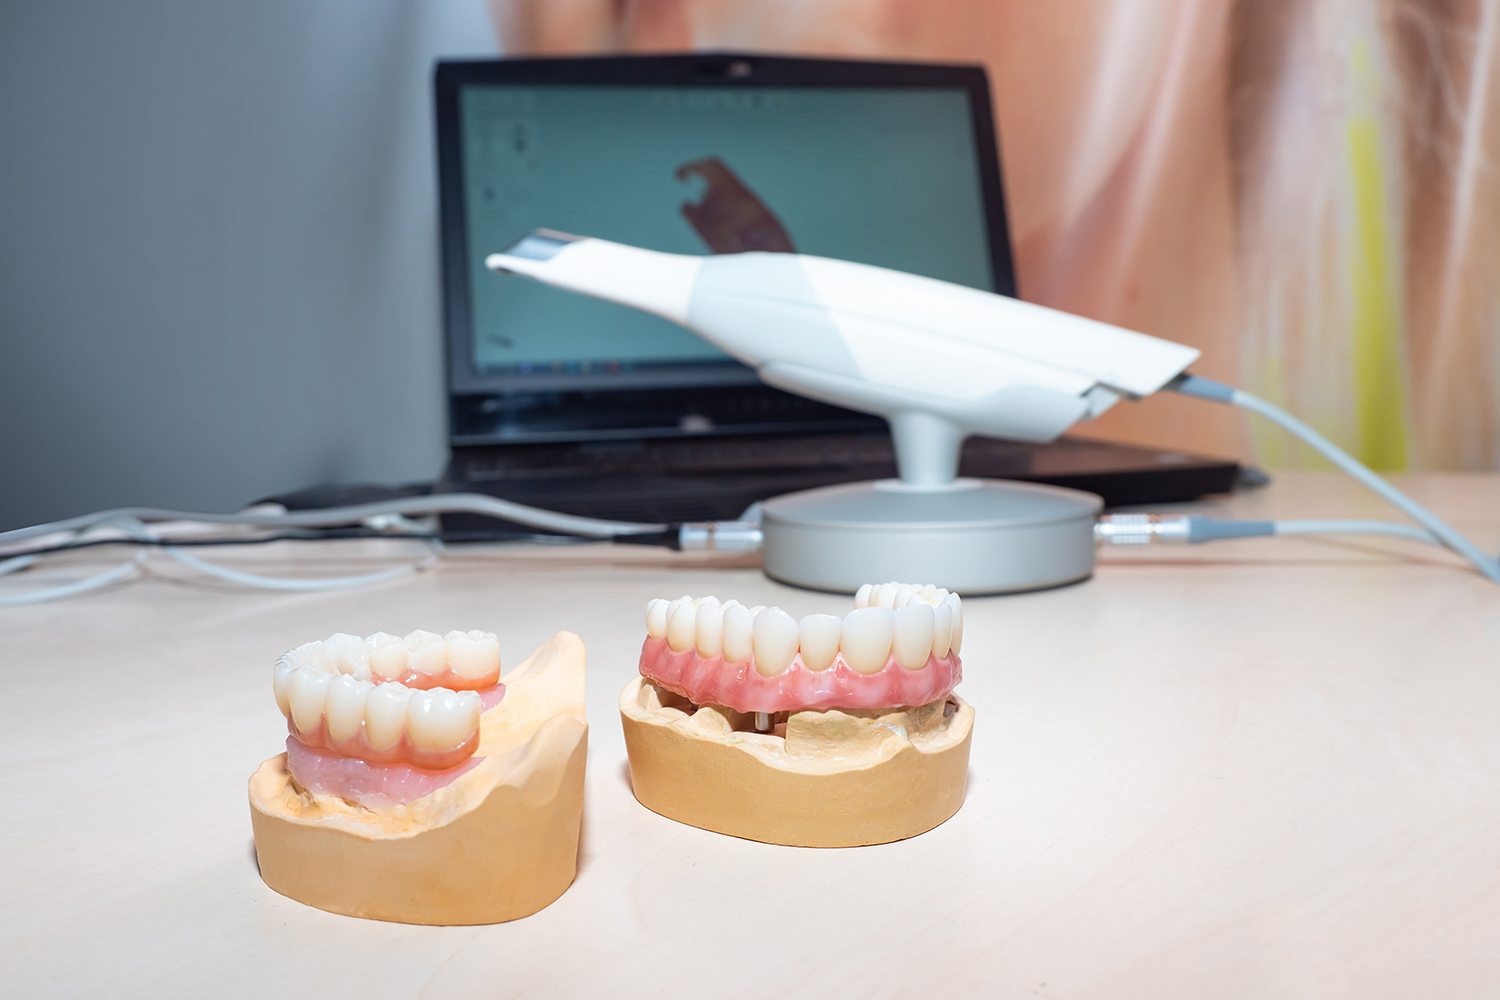 digital dentures using a digital scanner to scan in a model of teeth on the computer